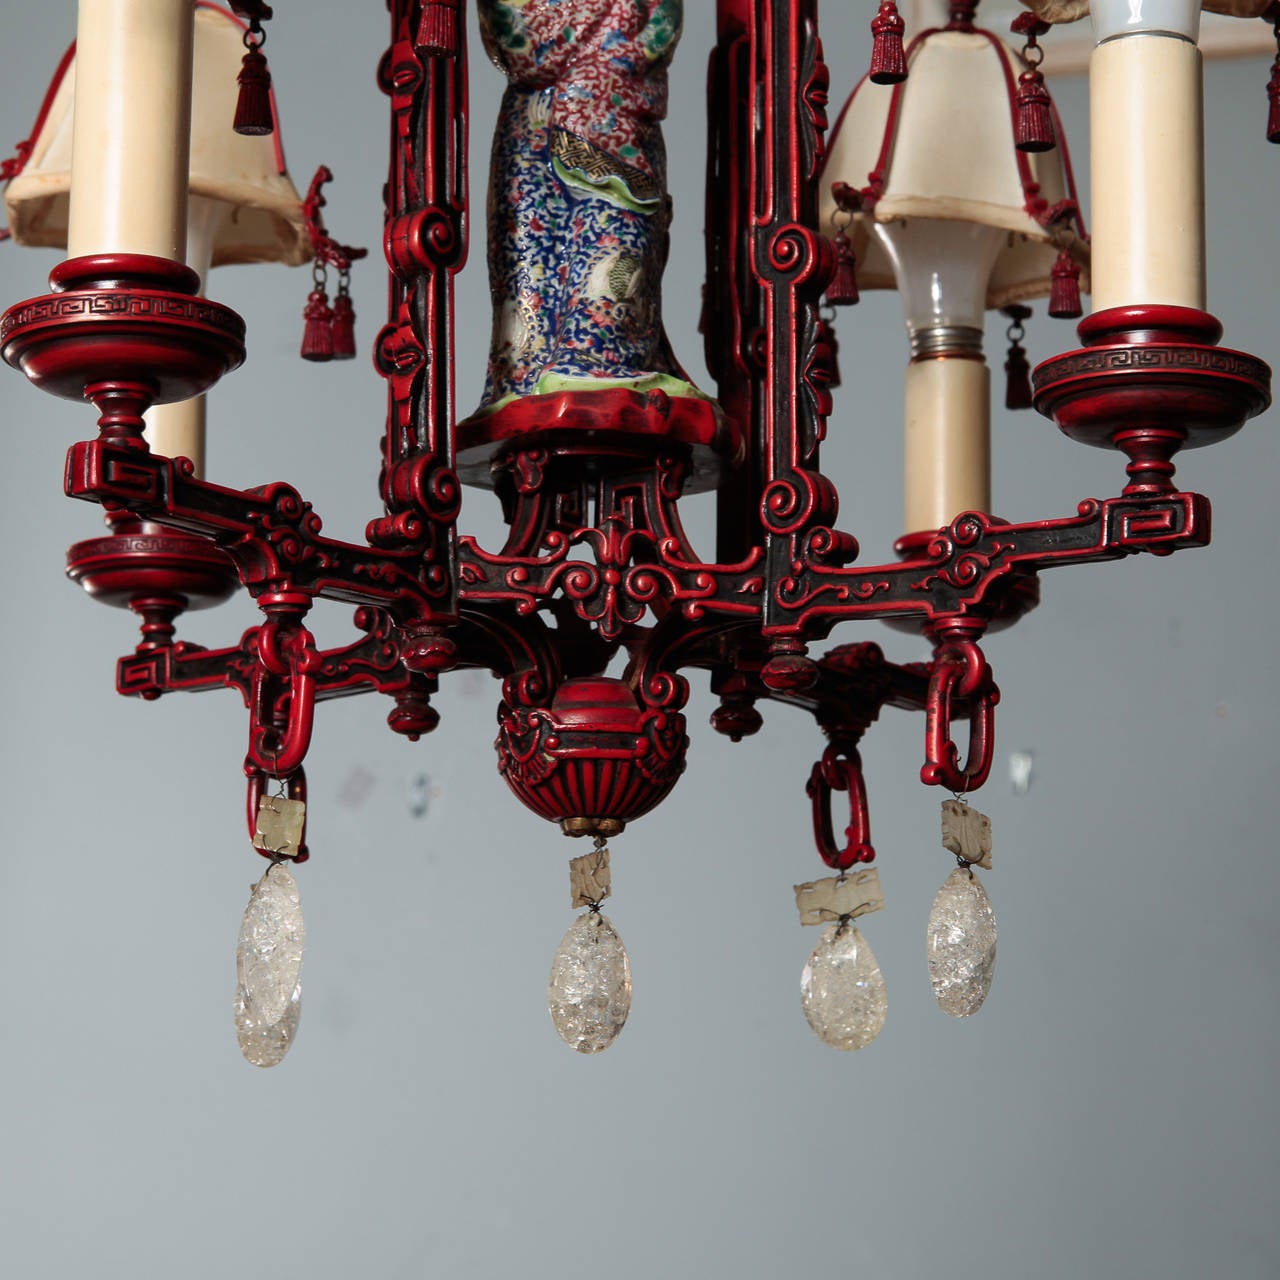 Unknown Red Chinoiserie Figural Chandelier with Original Shades and Rock Crystals